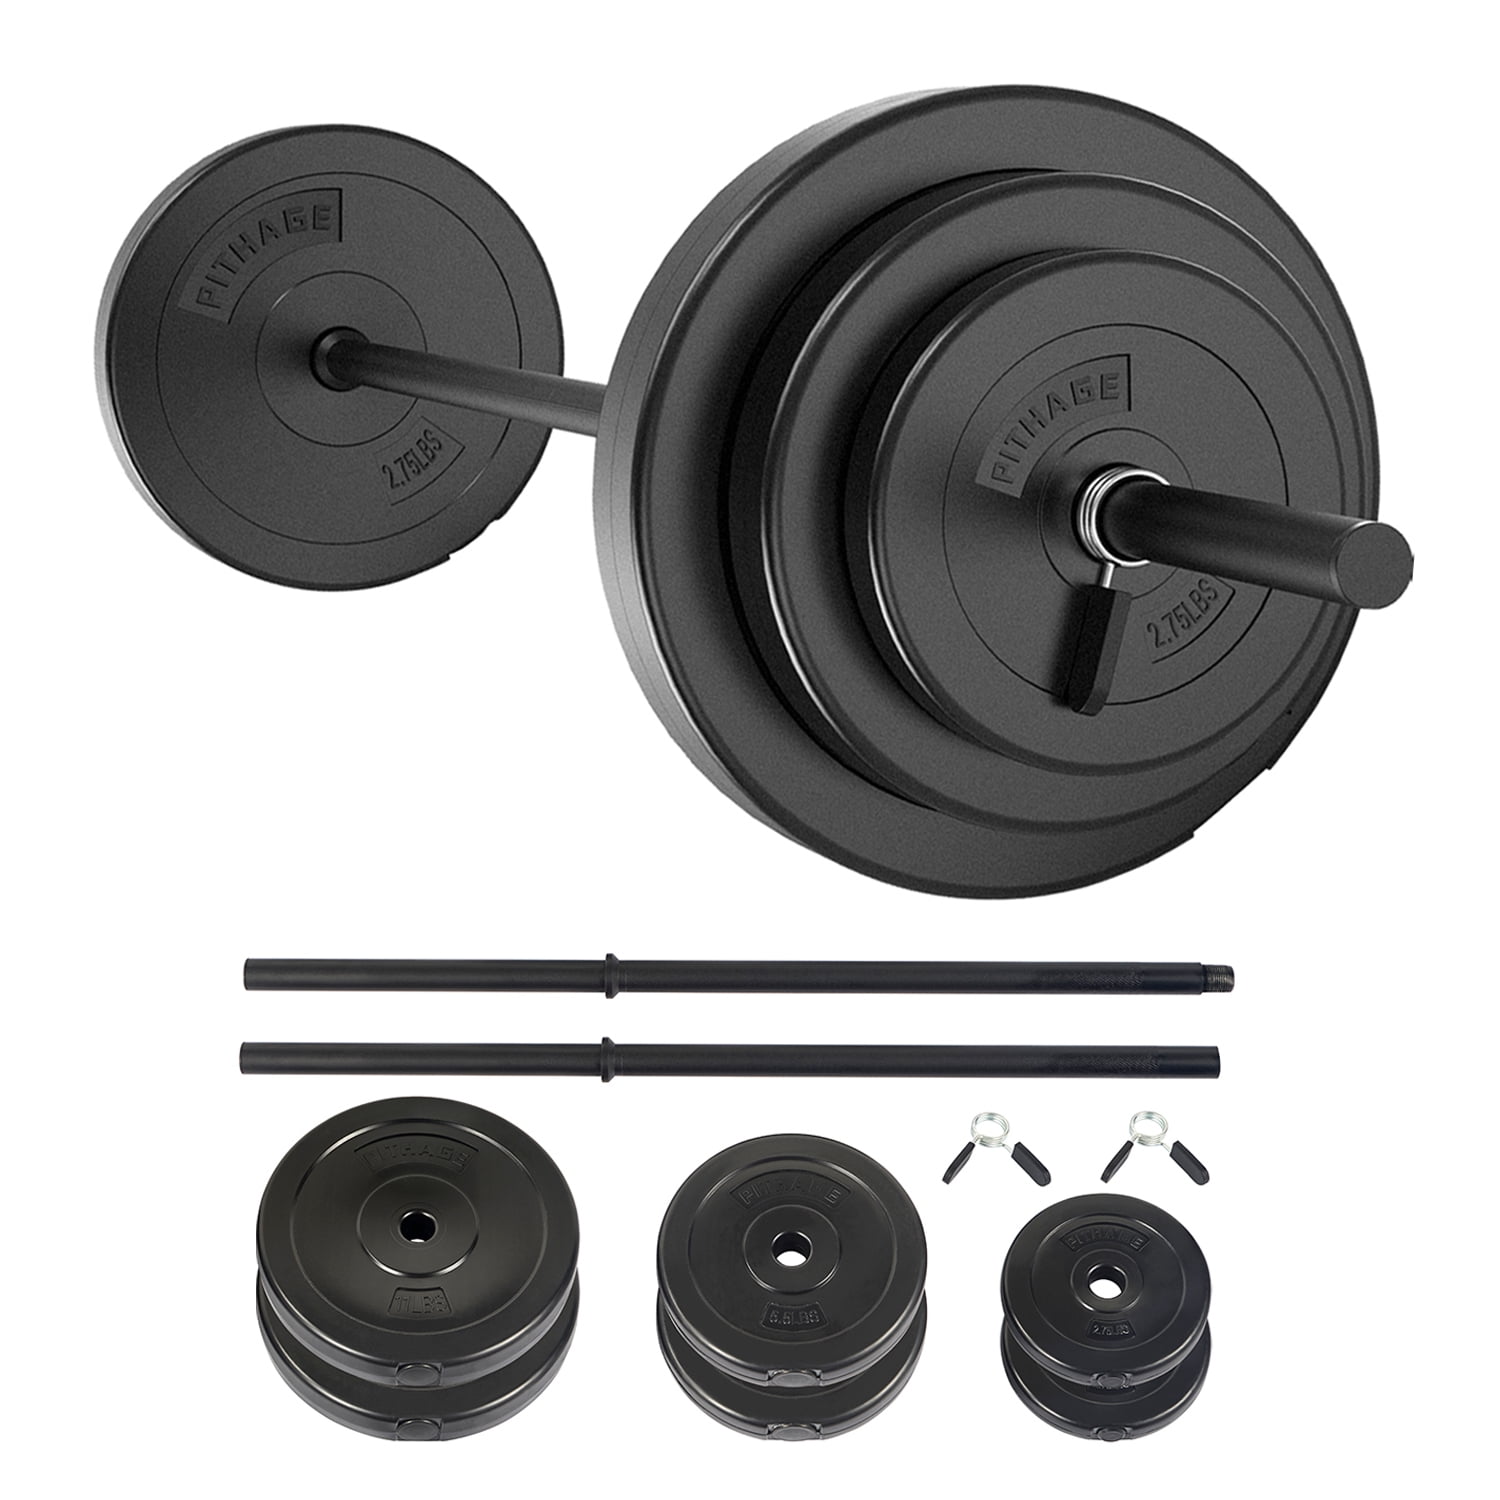 Gym Gift small barbell 45Lbs Bench Press Workout Gifts Gym